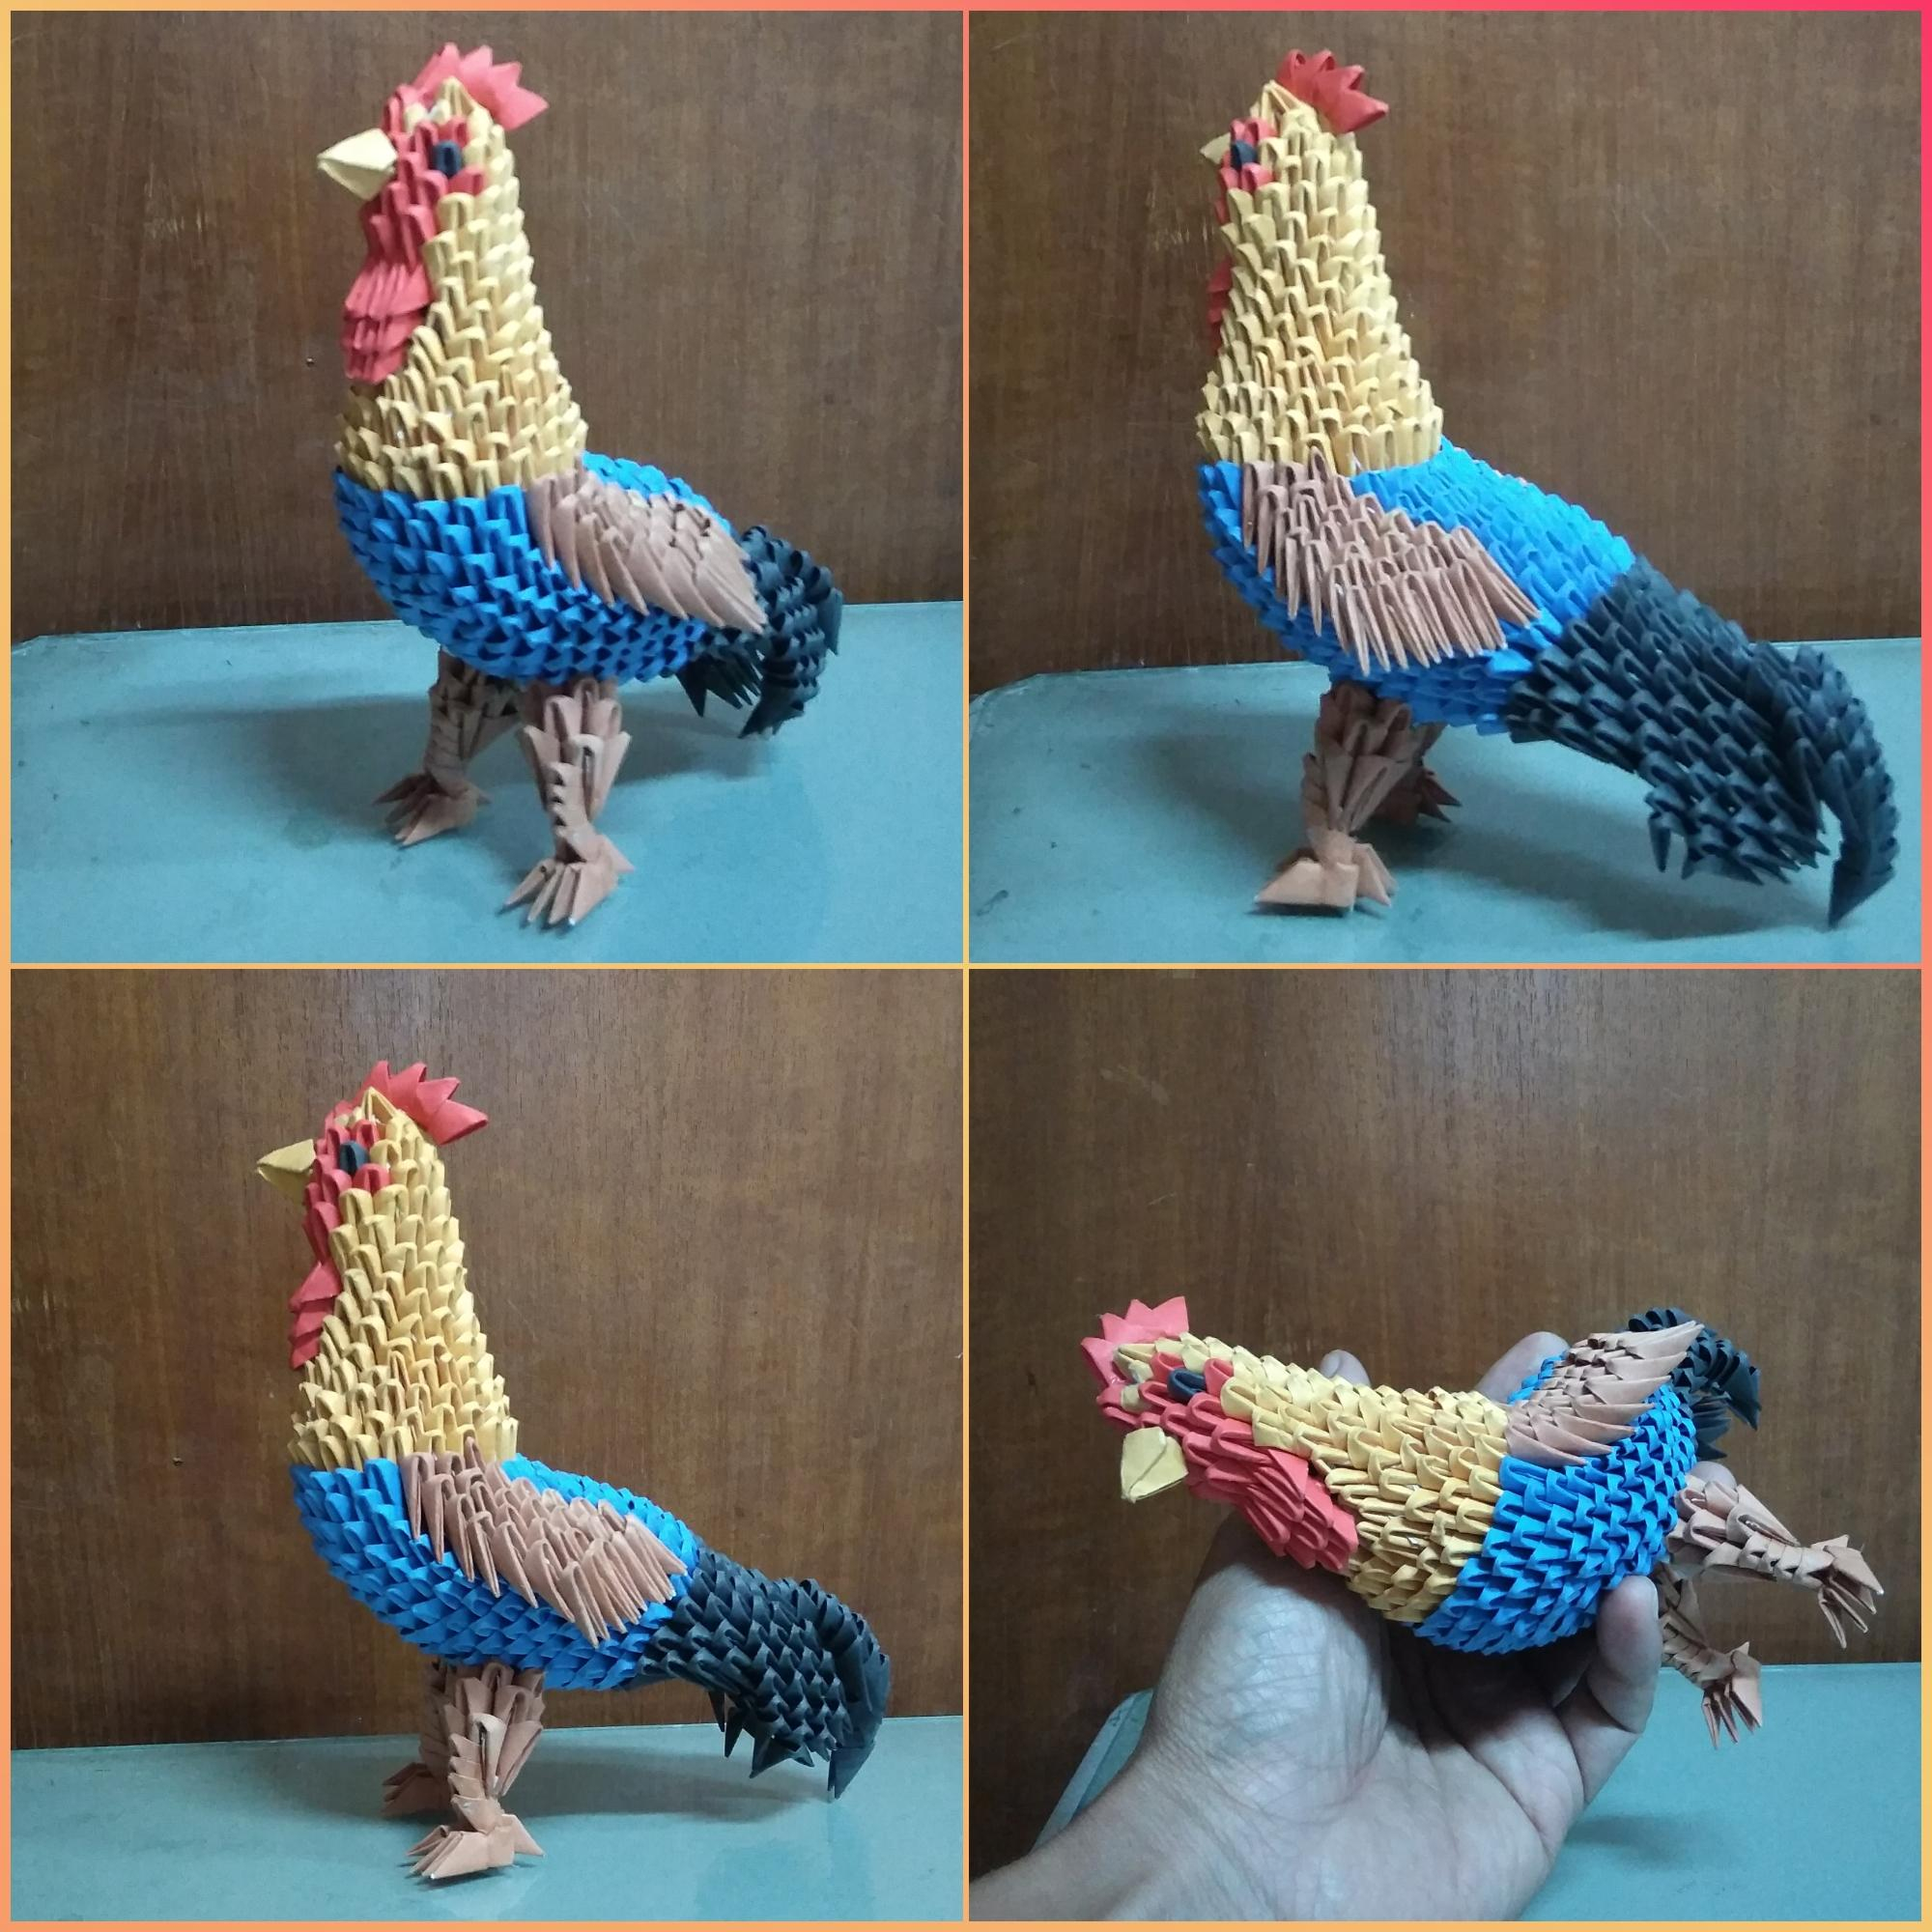 3D Origami Crafts Papercraft 3d Origami Rooster Tutorial In My Youtube Channel Crafts